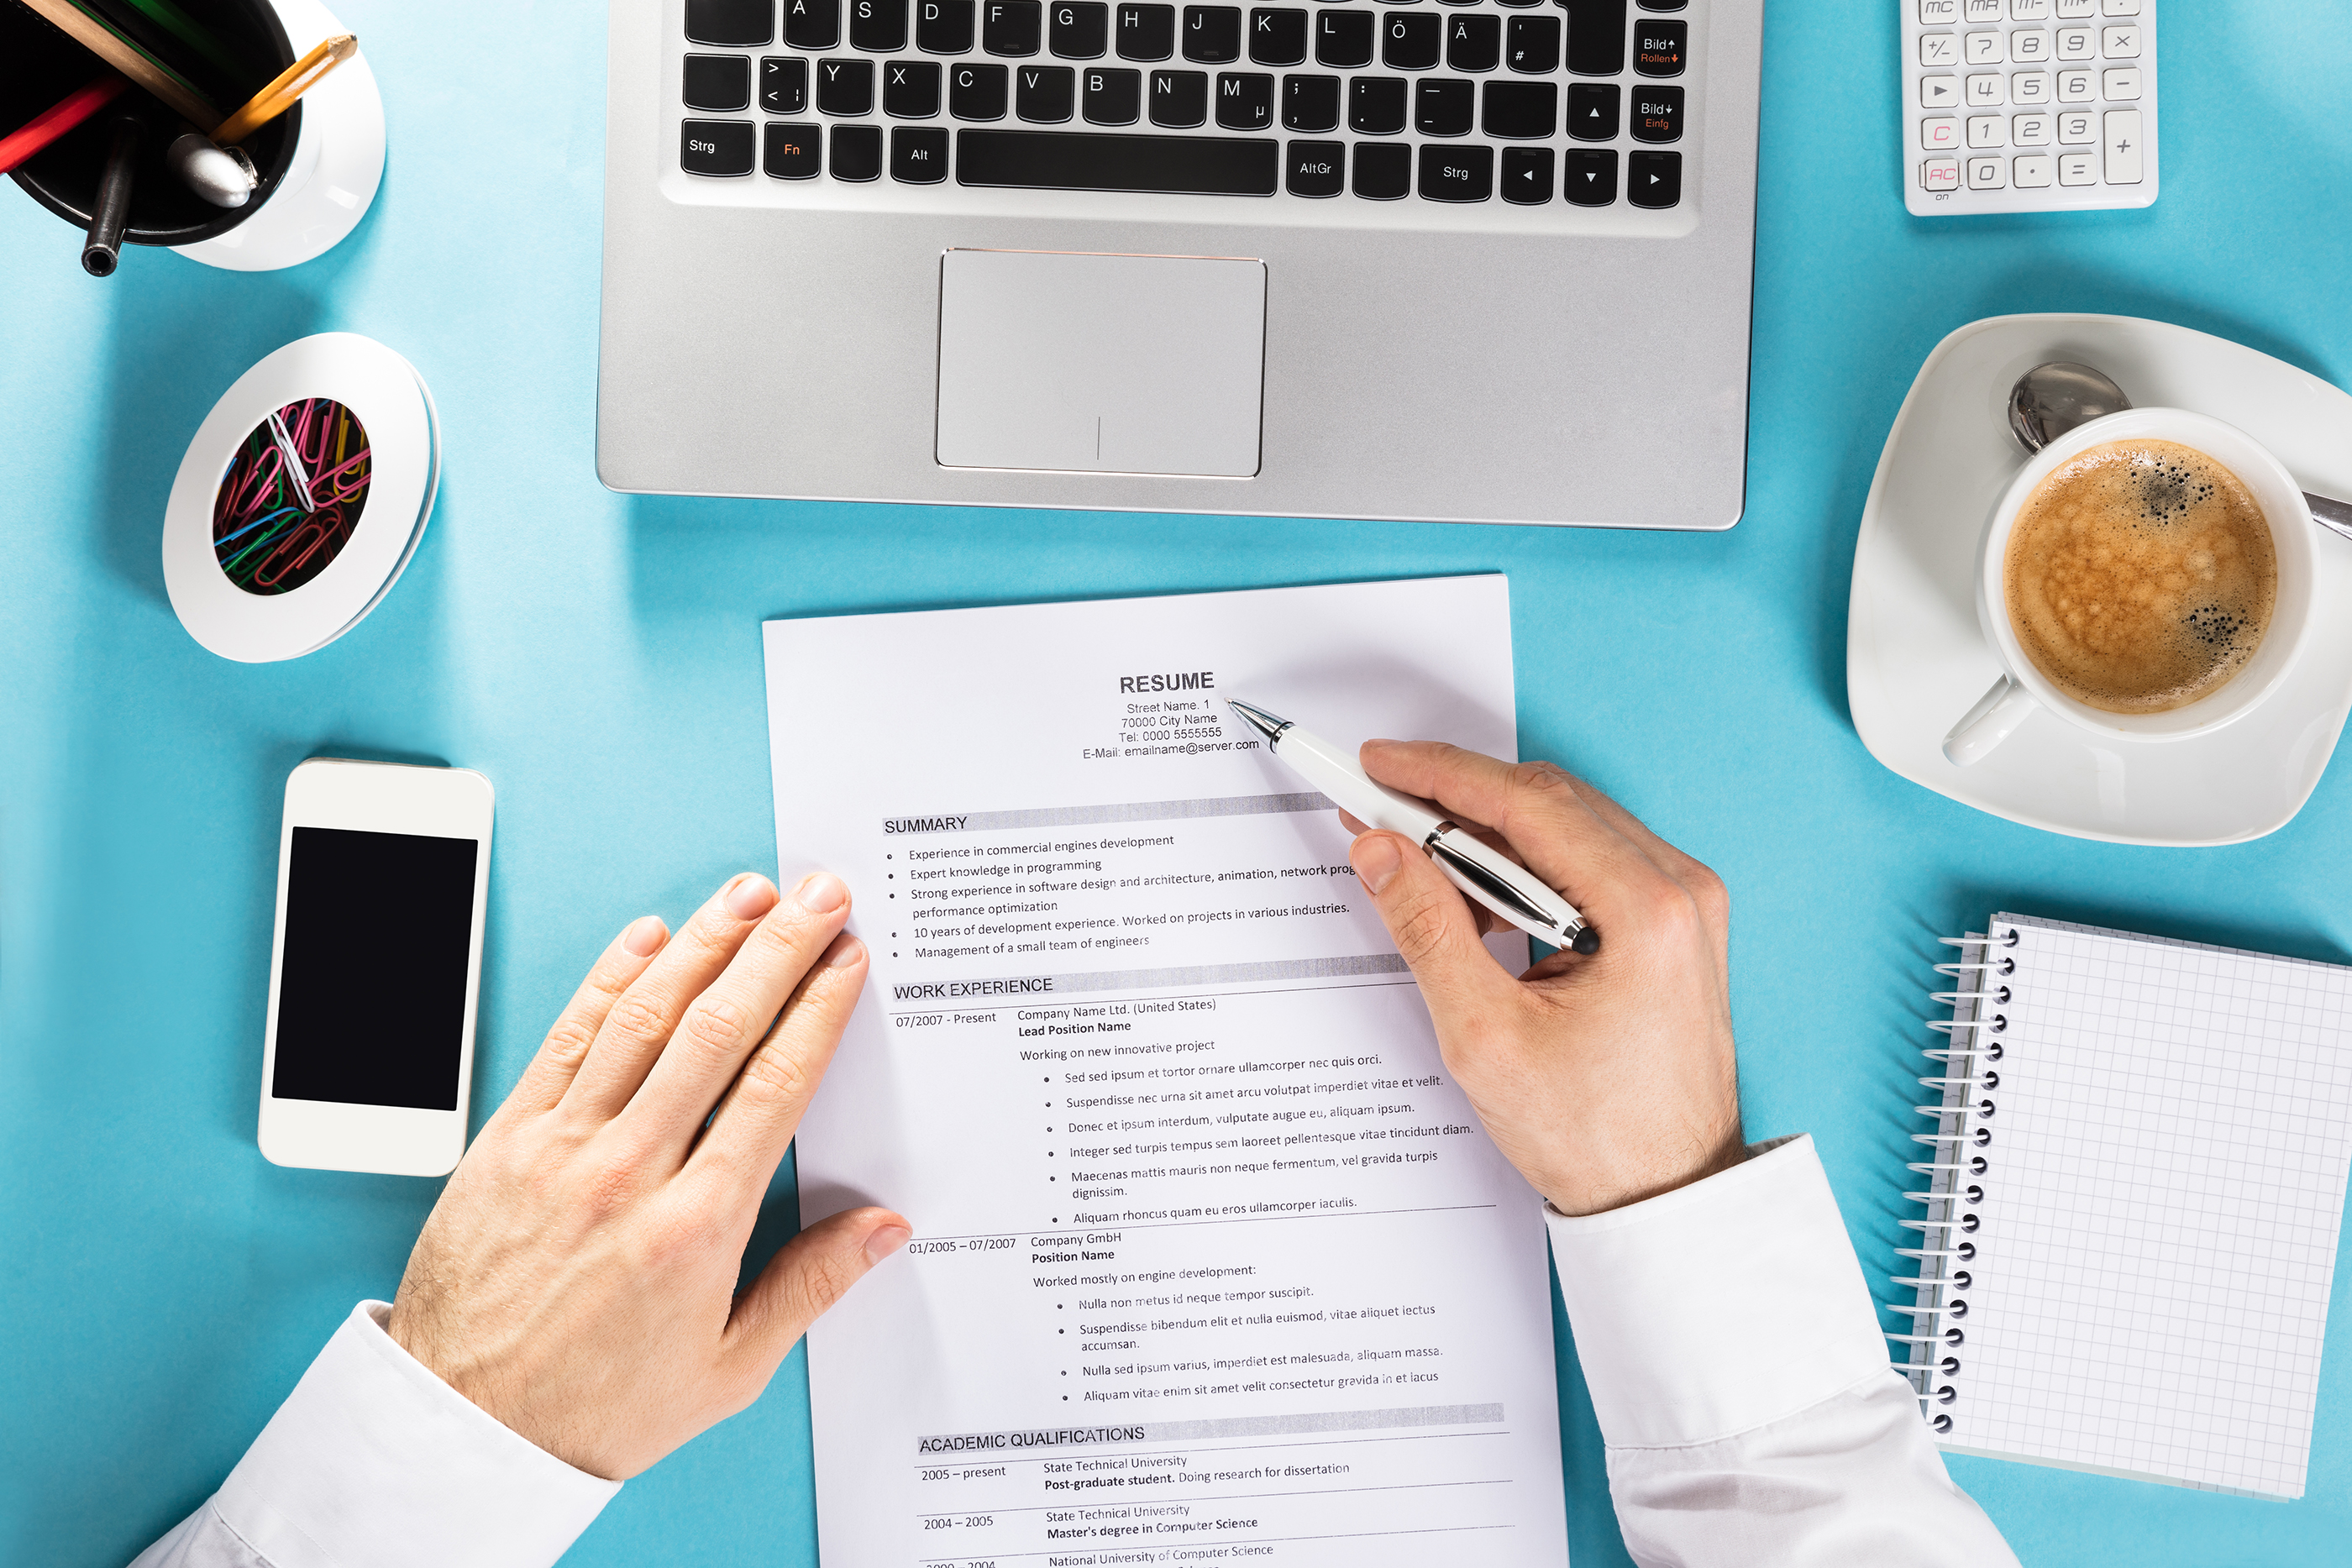 Can A Career Office Help You Write A Resume?